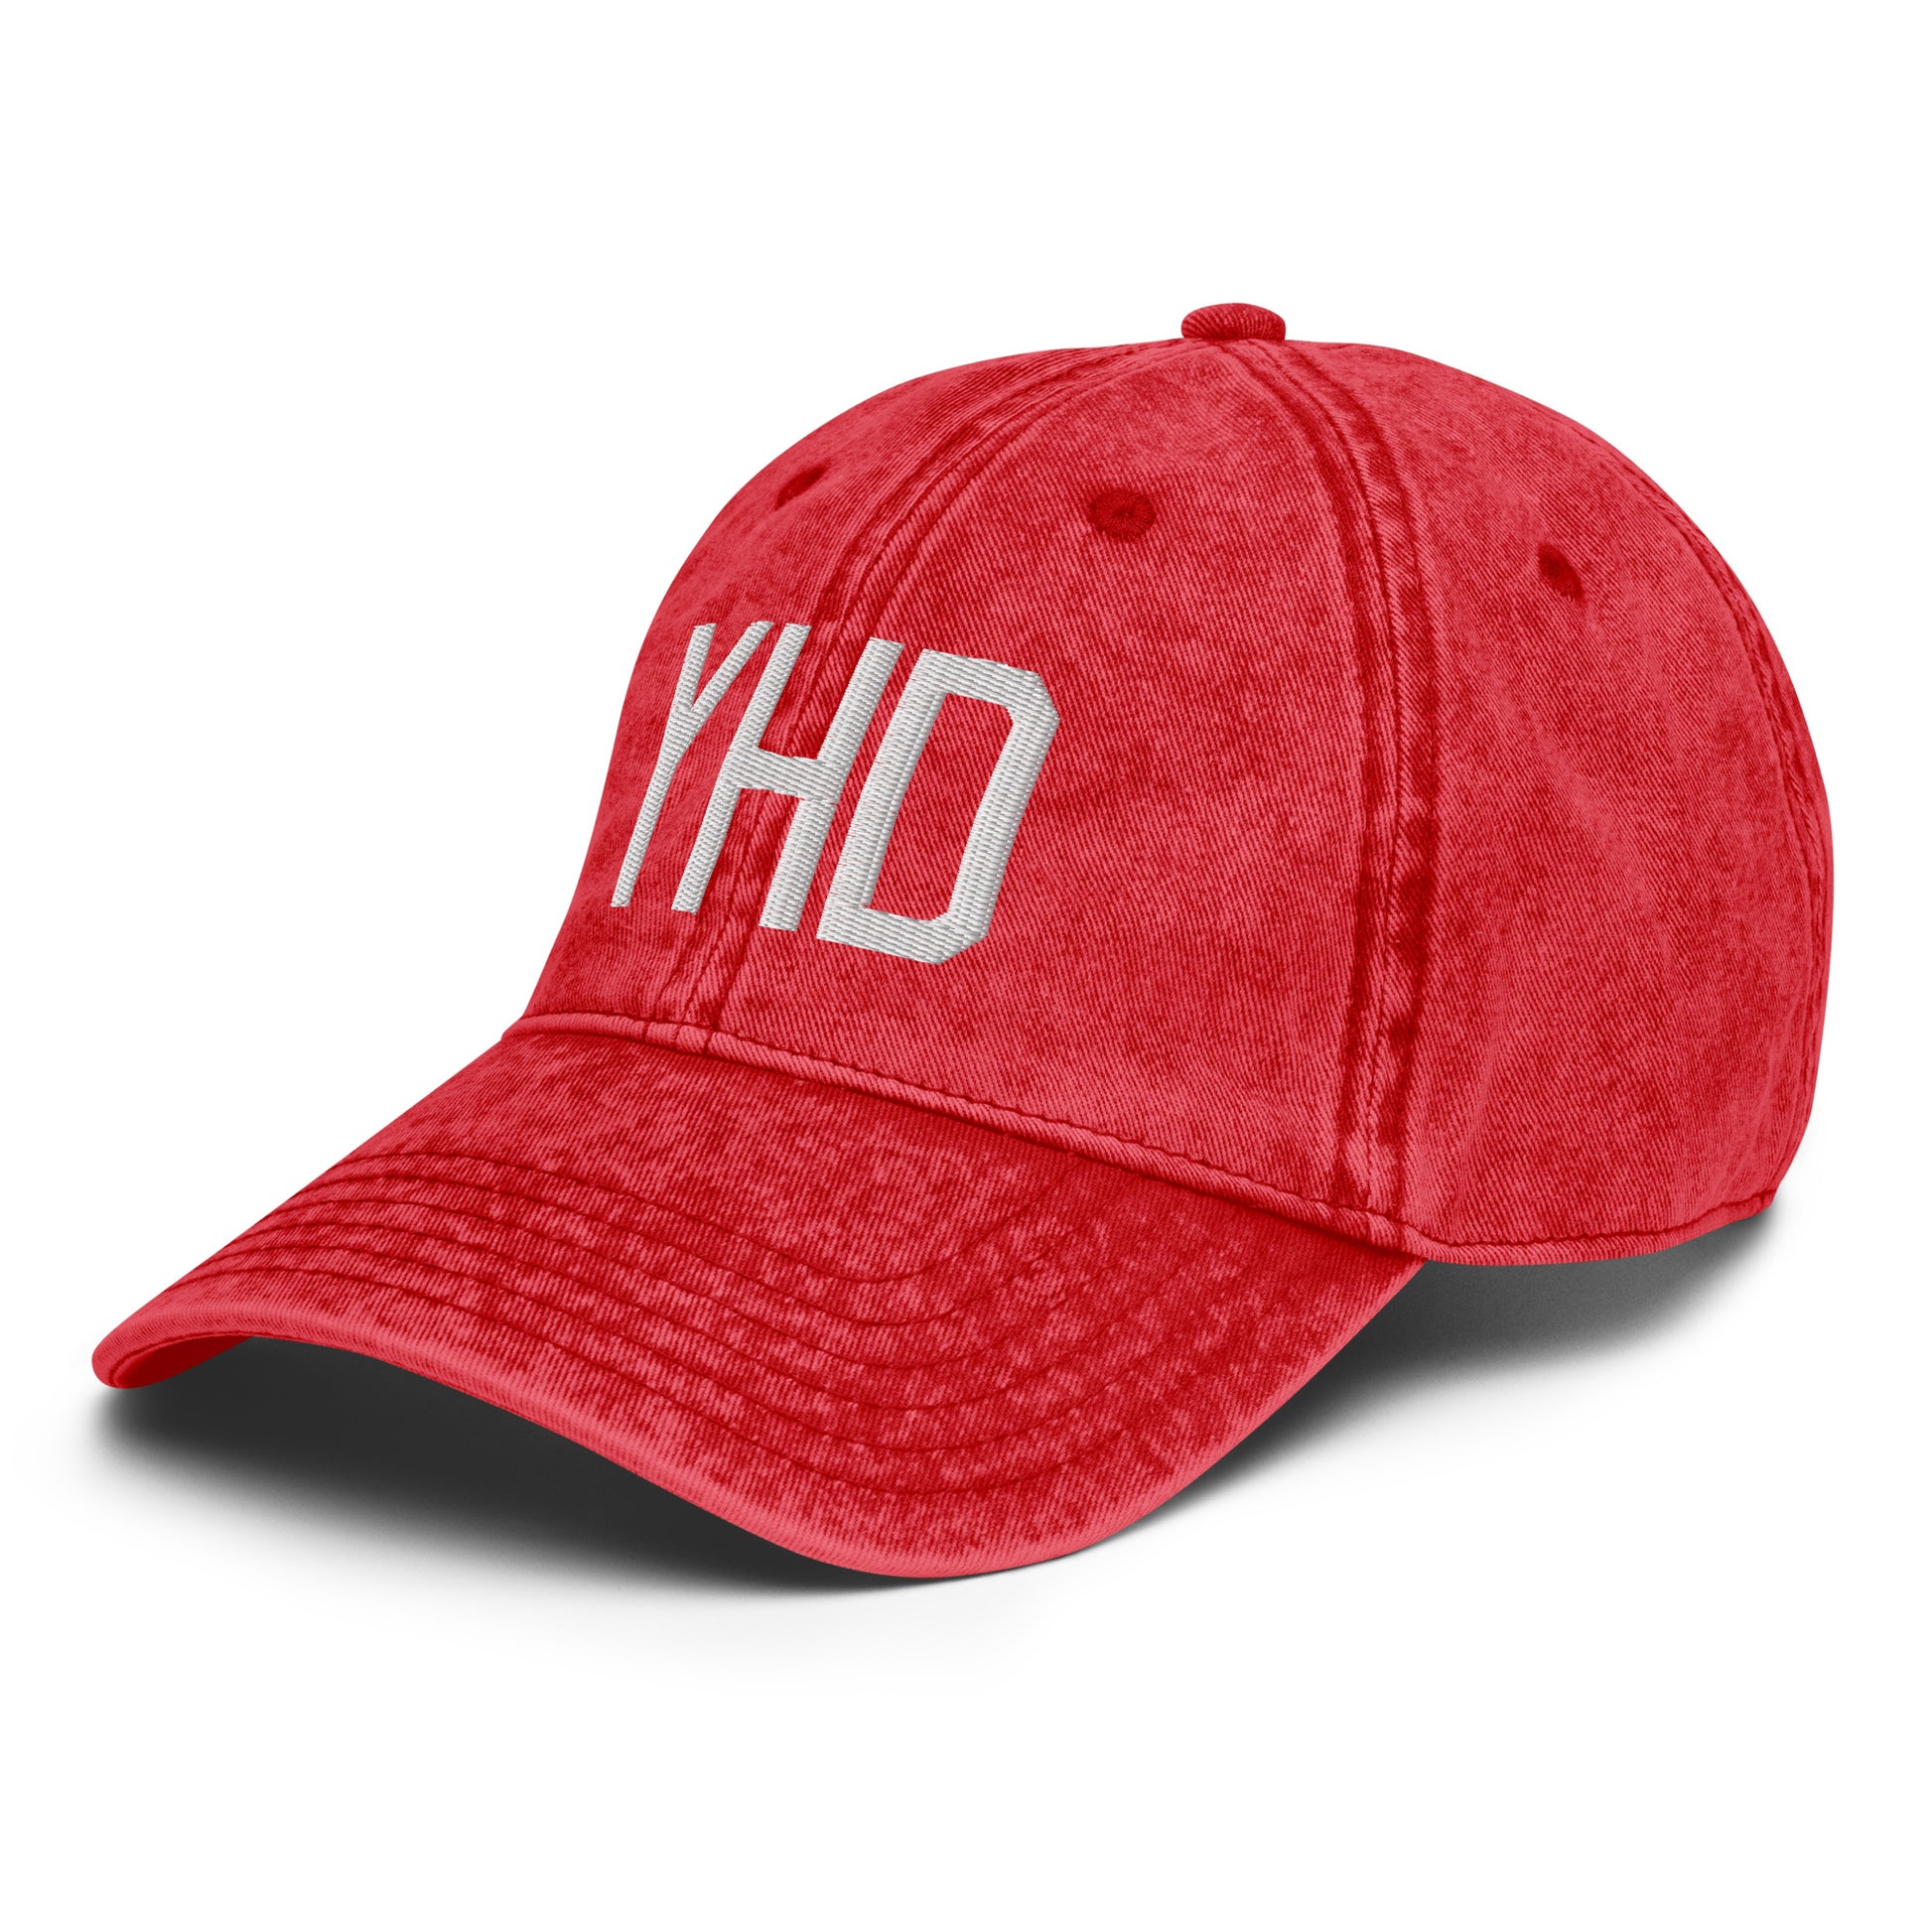 Airport Code Twill Cap - White • YHD Dryden • YHM Designs - Image 23